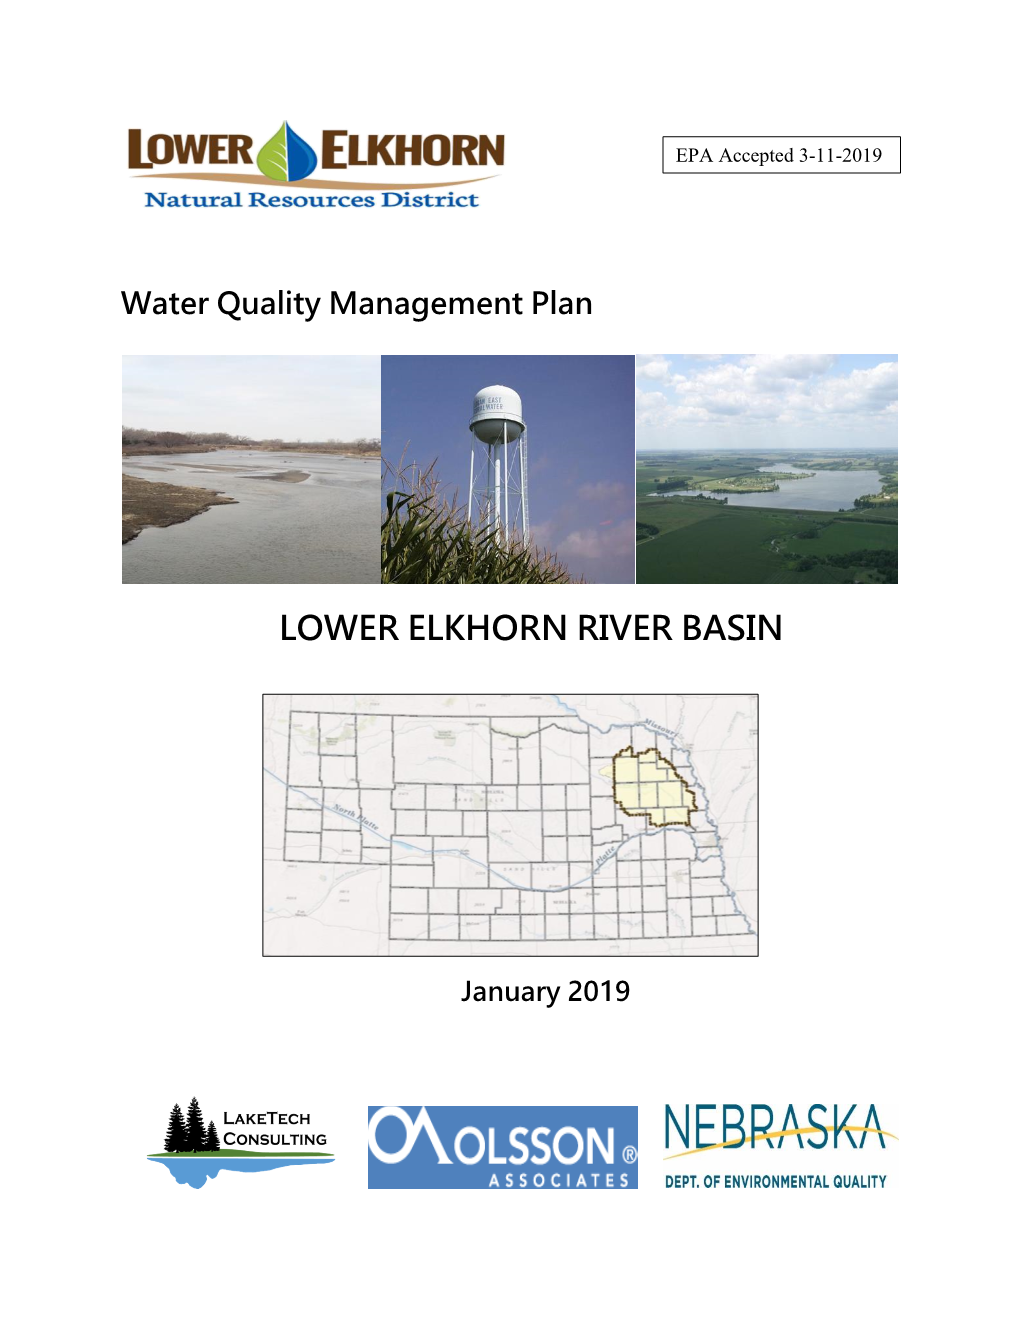 Lower Elkhorn River Basin Water Quality Management Plan (The Plan)